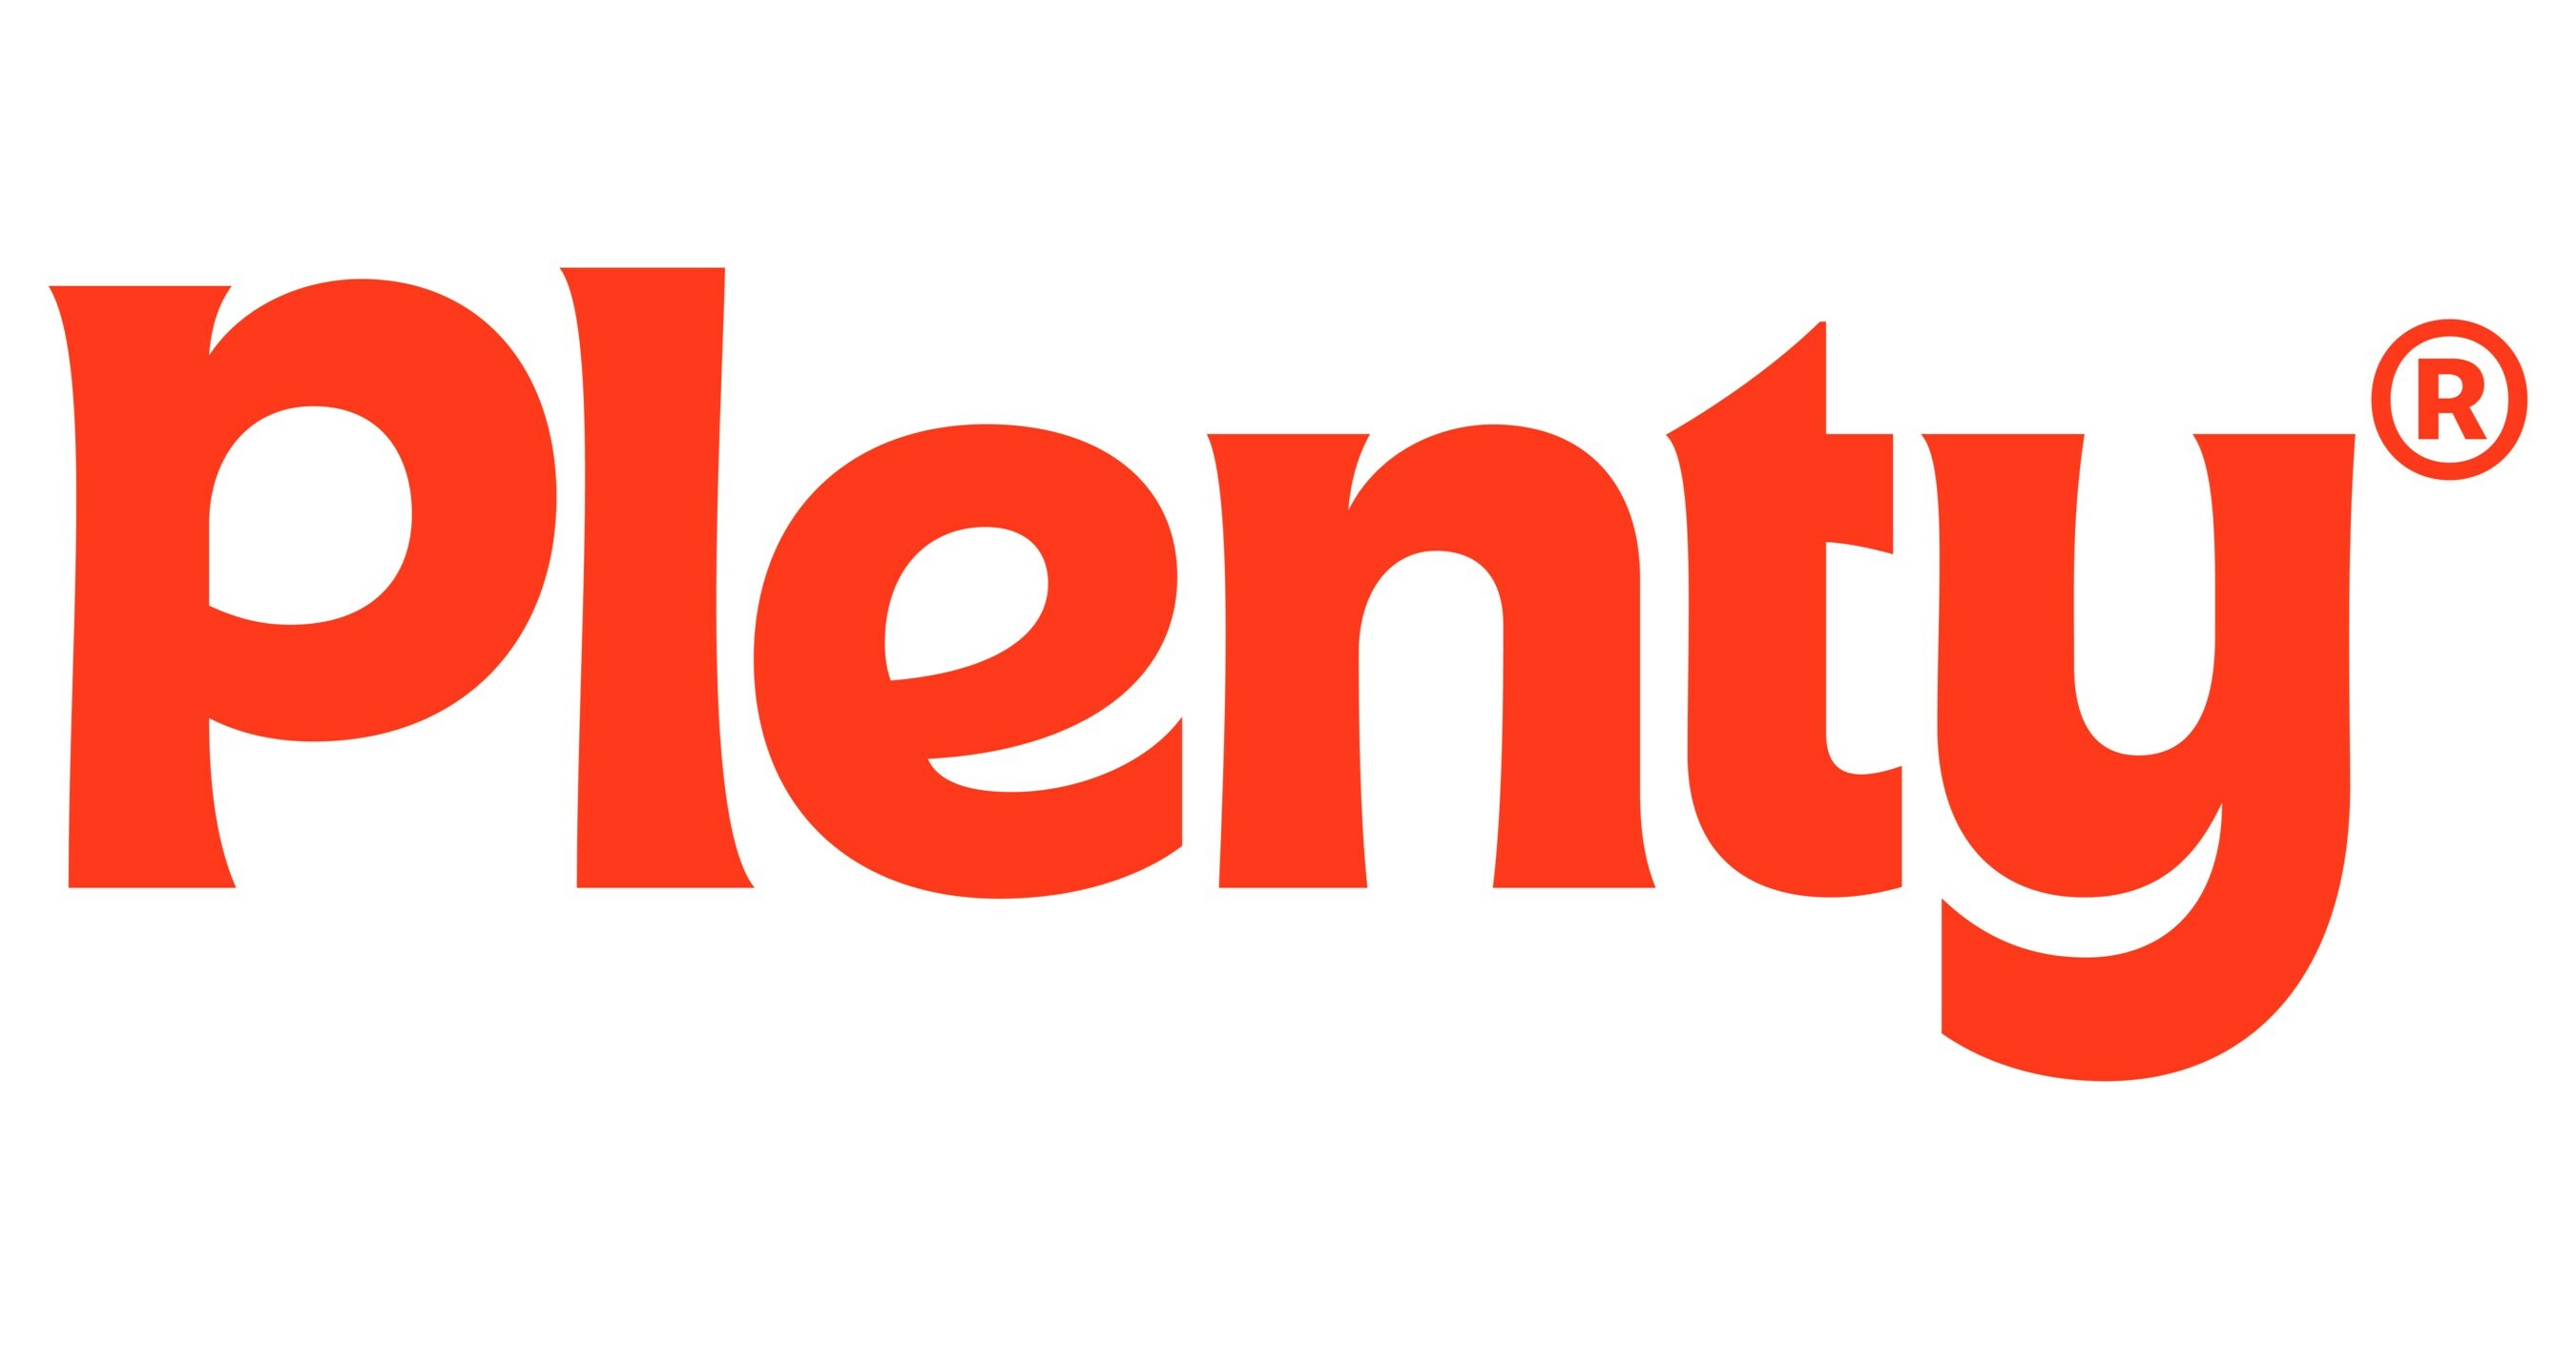 Plenty appoints vice president of plant science and architecture firm to advance development of the world’s largest vertical farming research center